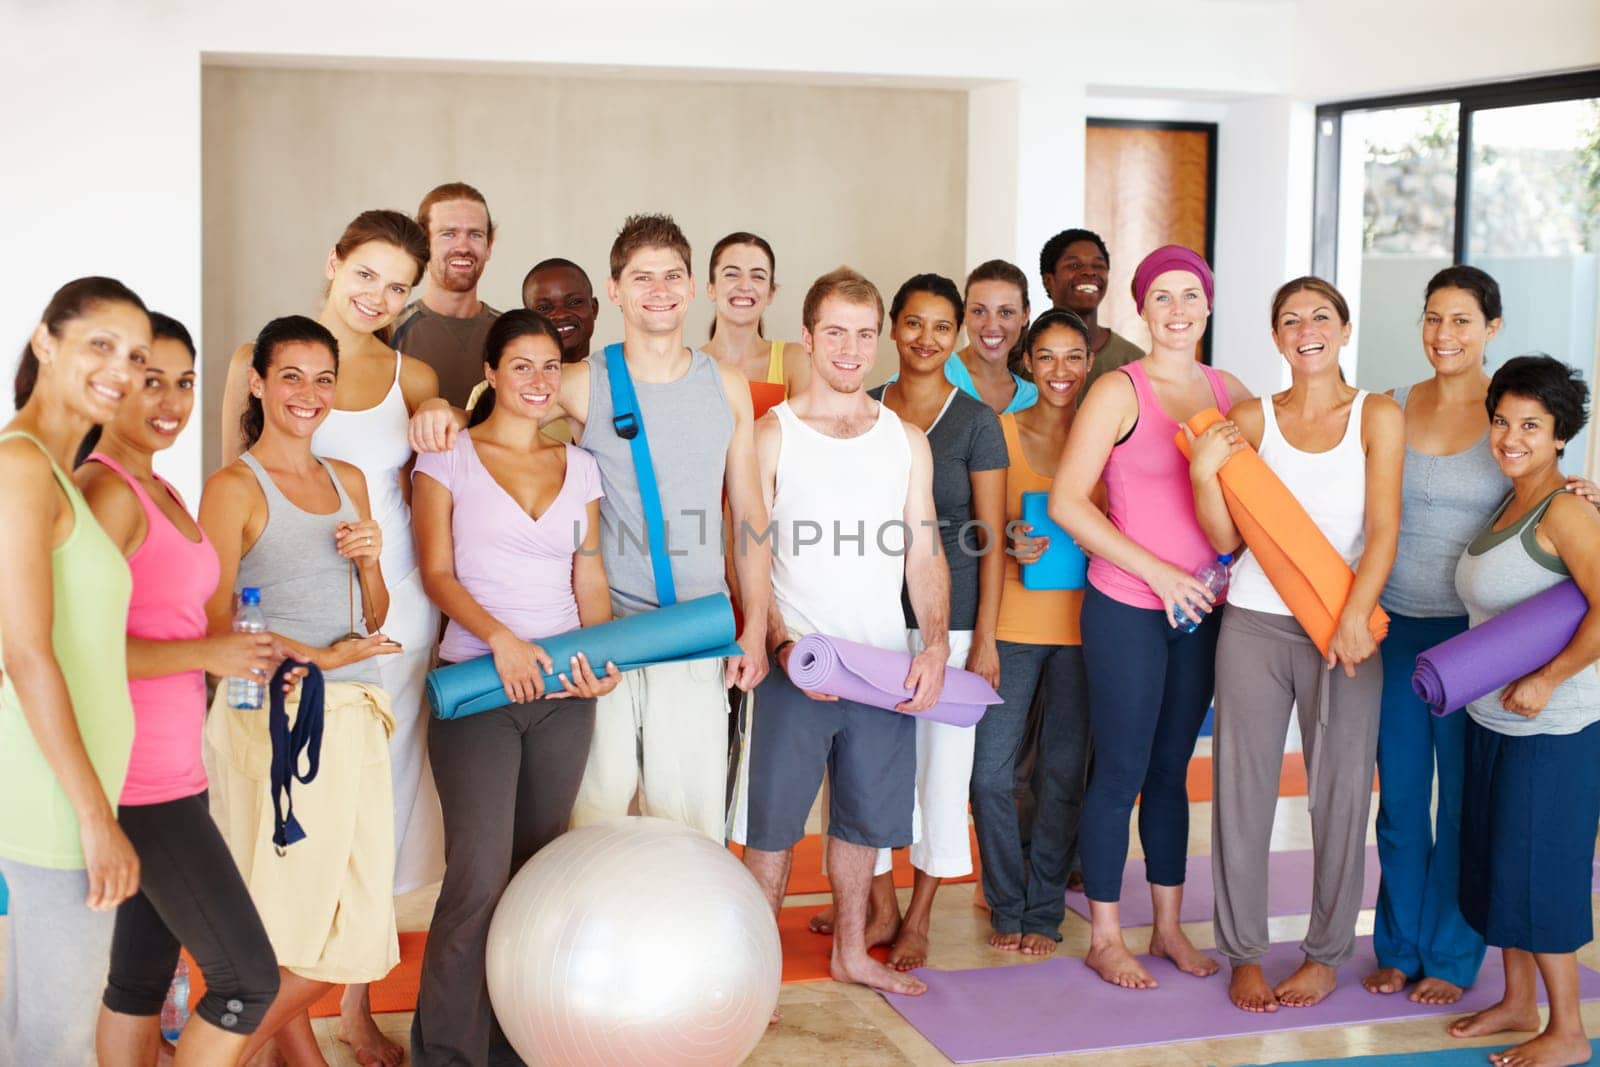 Happy in their yoga class. Portrait of a a group of yoga enthusiasts standing in a yoga studio